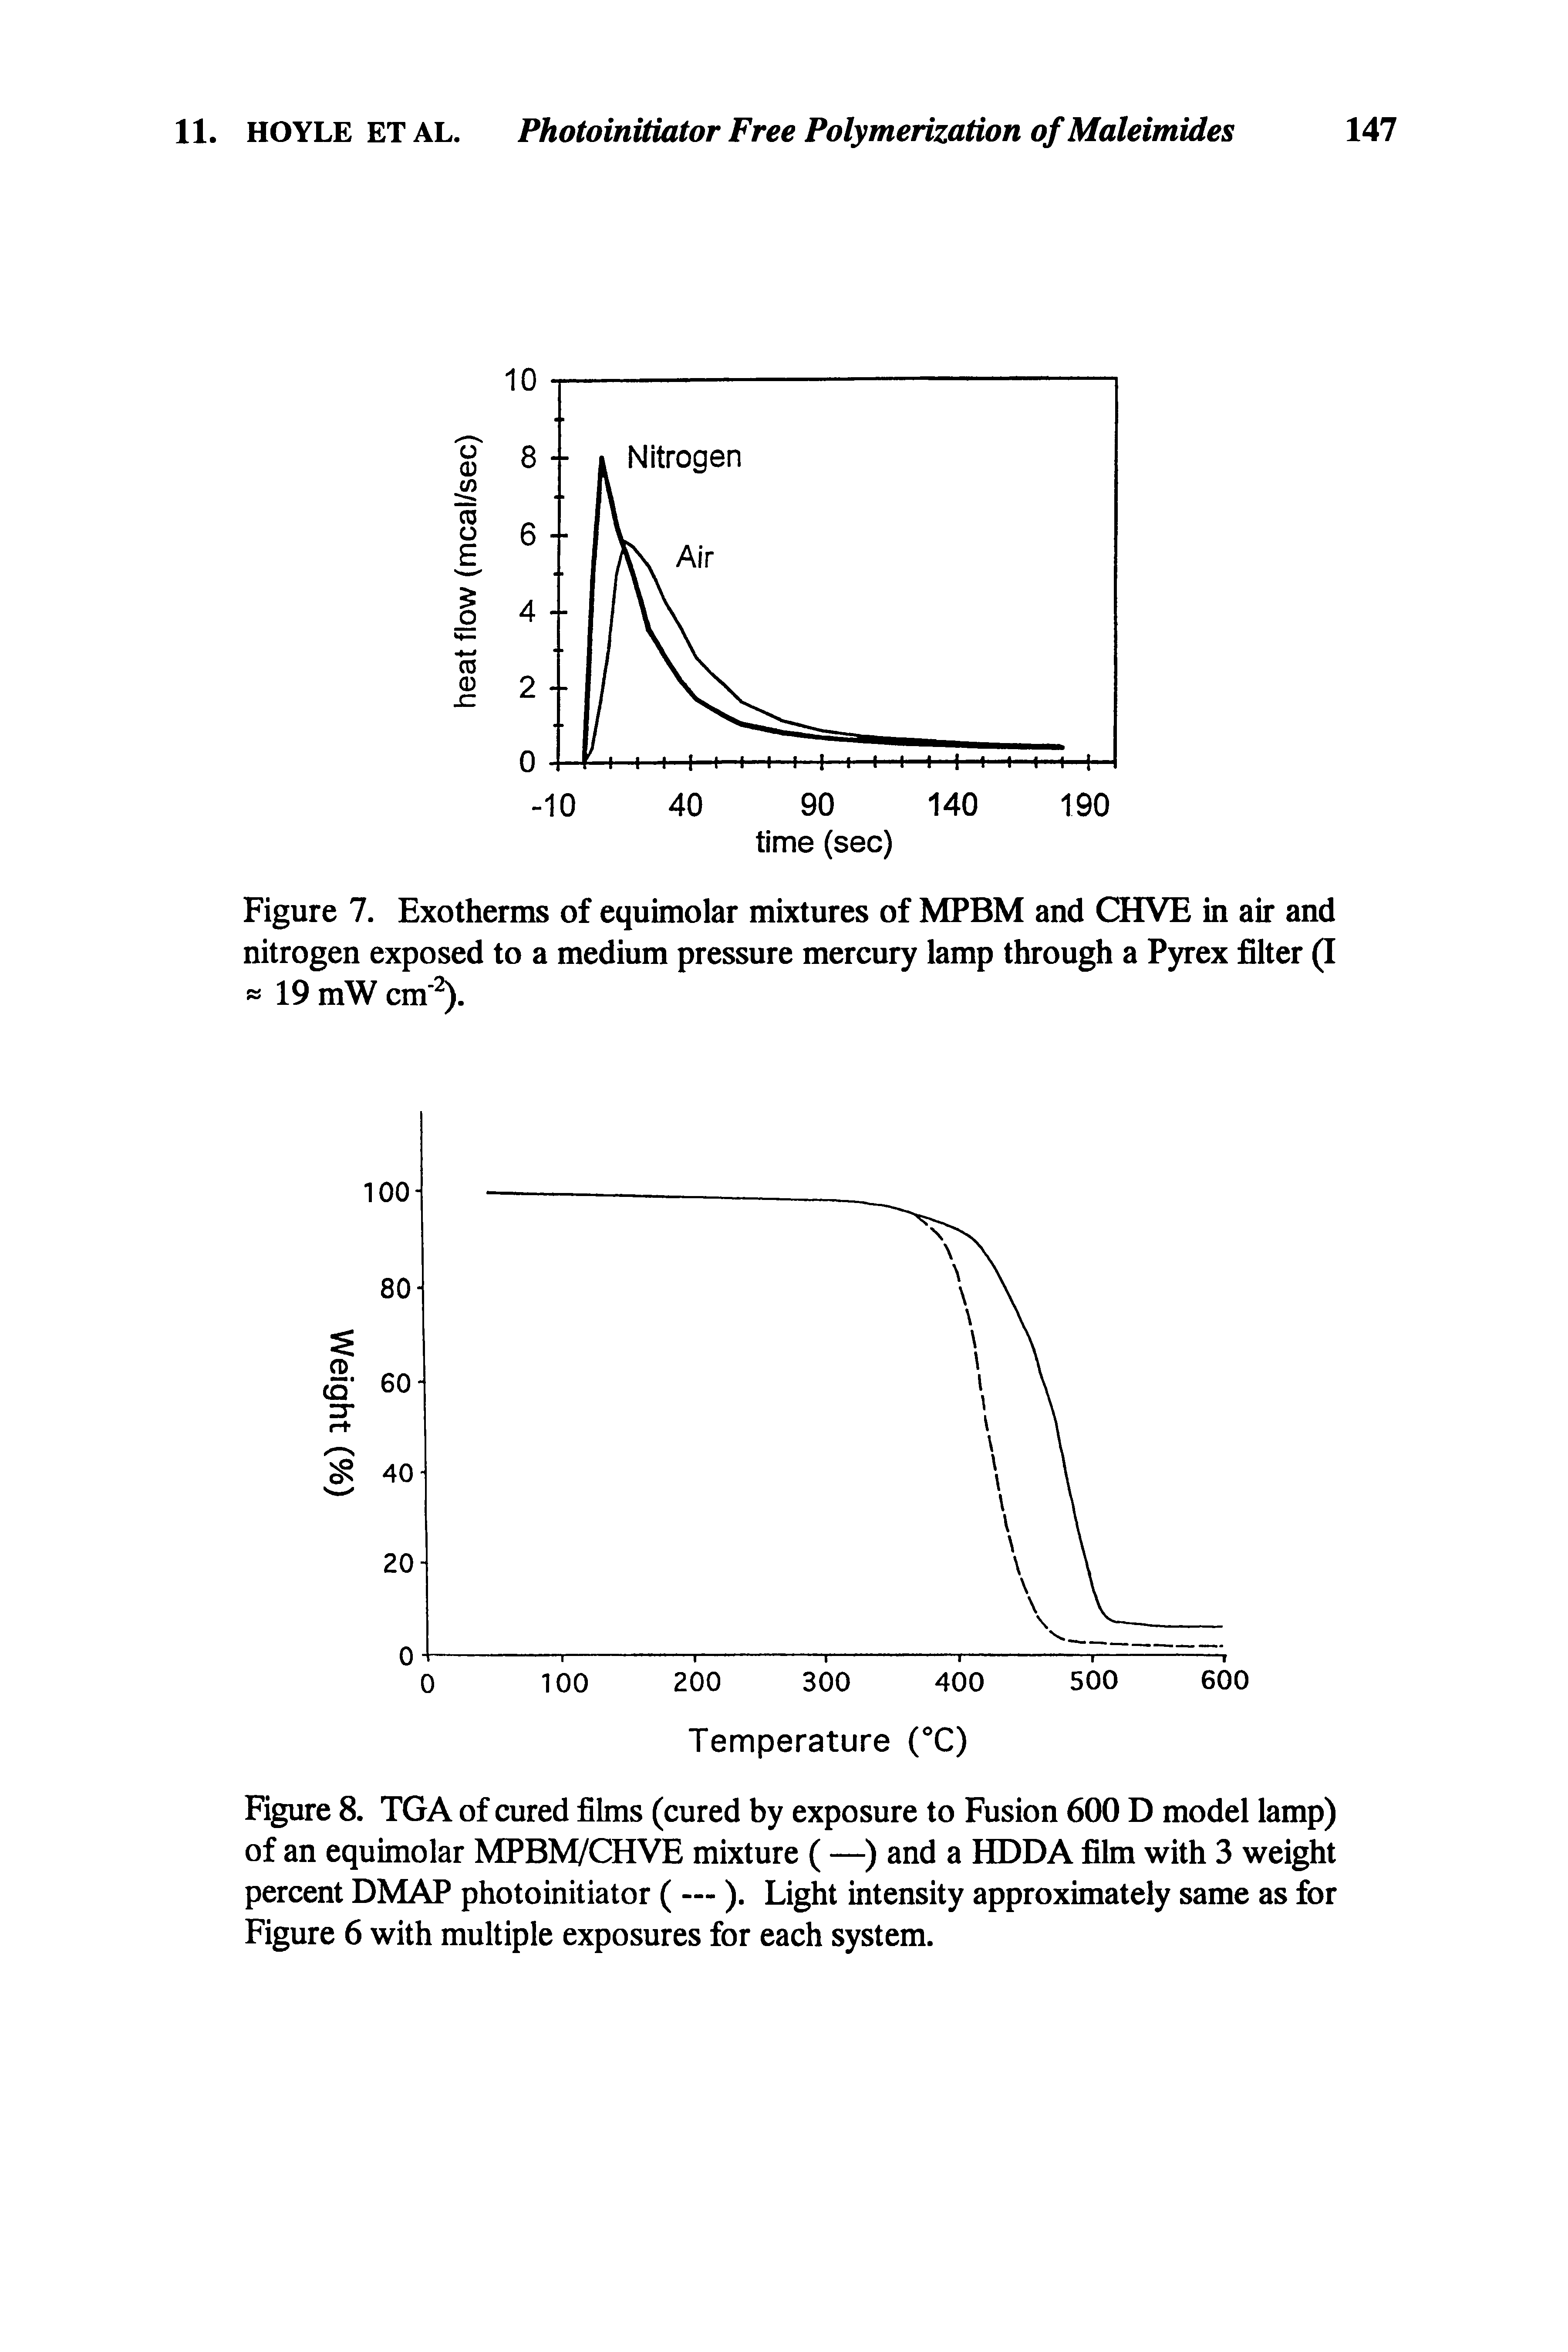 Figure 8. TGA of cured films (cured by exposure to Fusion 600 D model lamp) of an equimolar MPBM/CHVE mixture ( —) and a HDDA film with 3 weight percent DMAP photoinitiator ( — ). Light intensity approximately same as for Figure 6 with multiple exposures for each system.